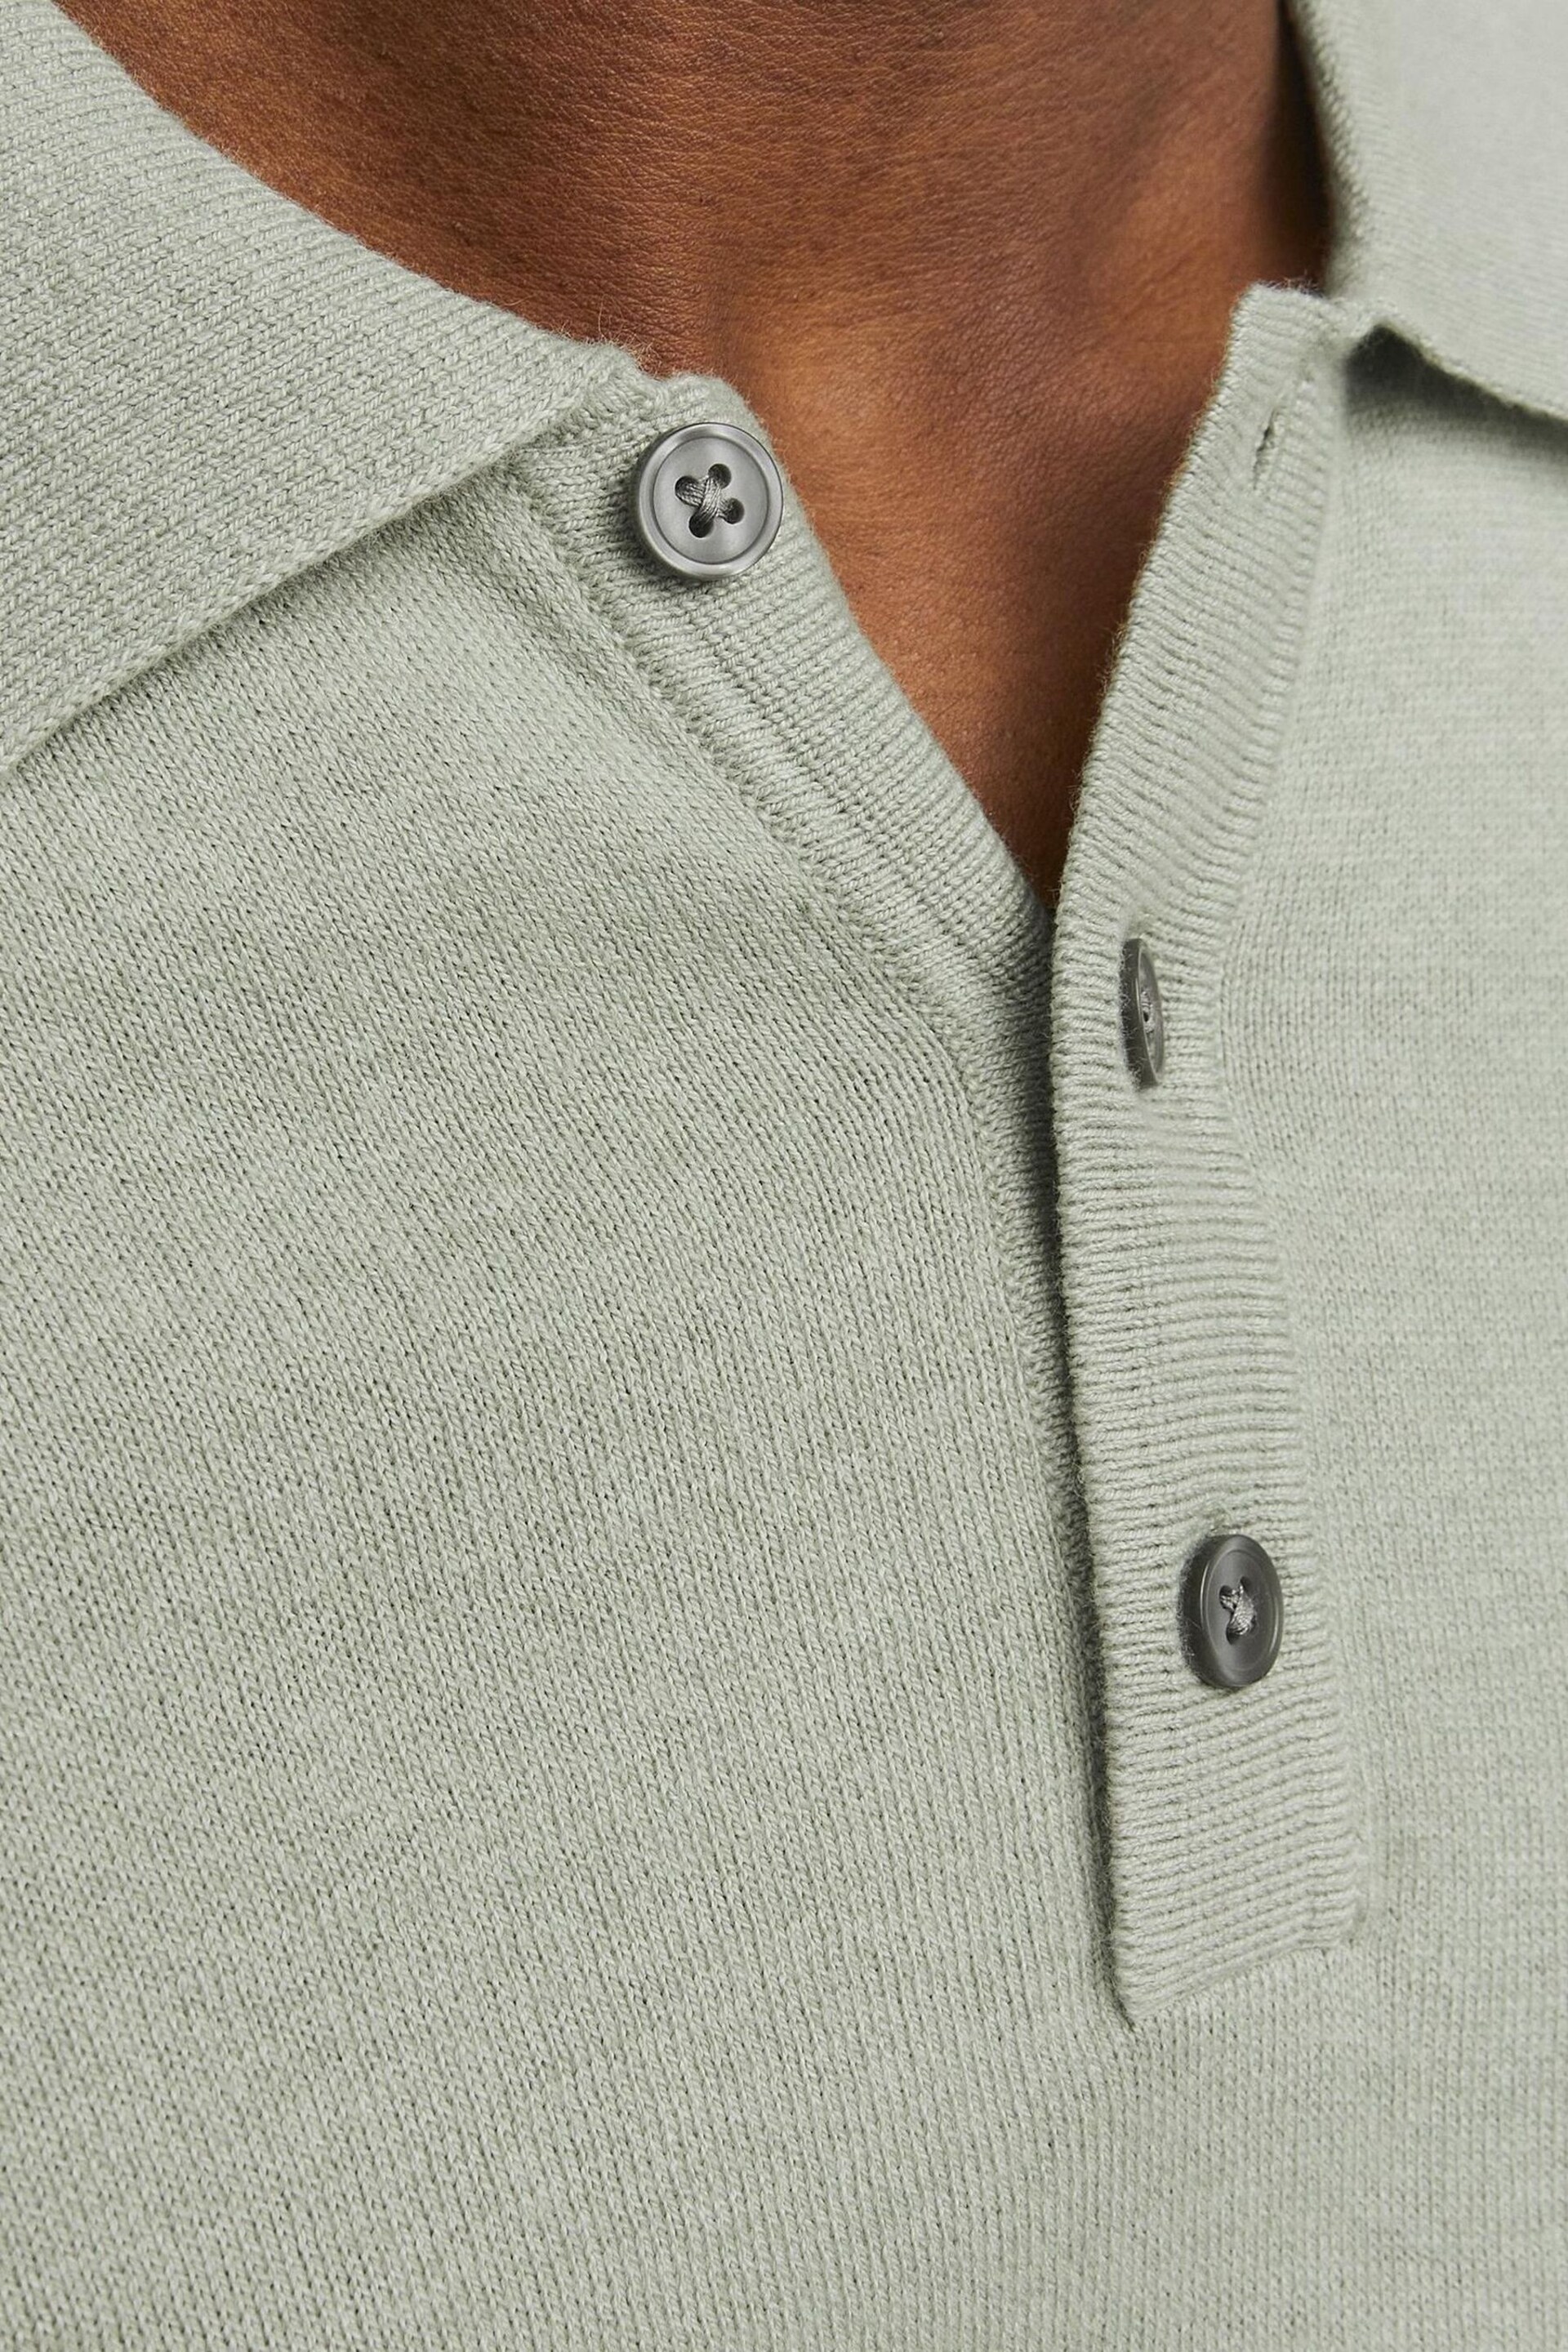 JACK & JONES Green Knitted Polo Top - Image 3 of 5